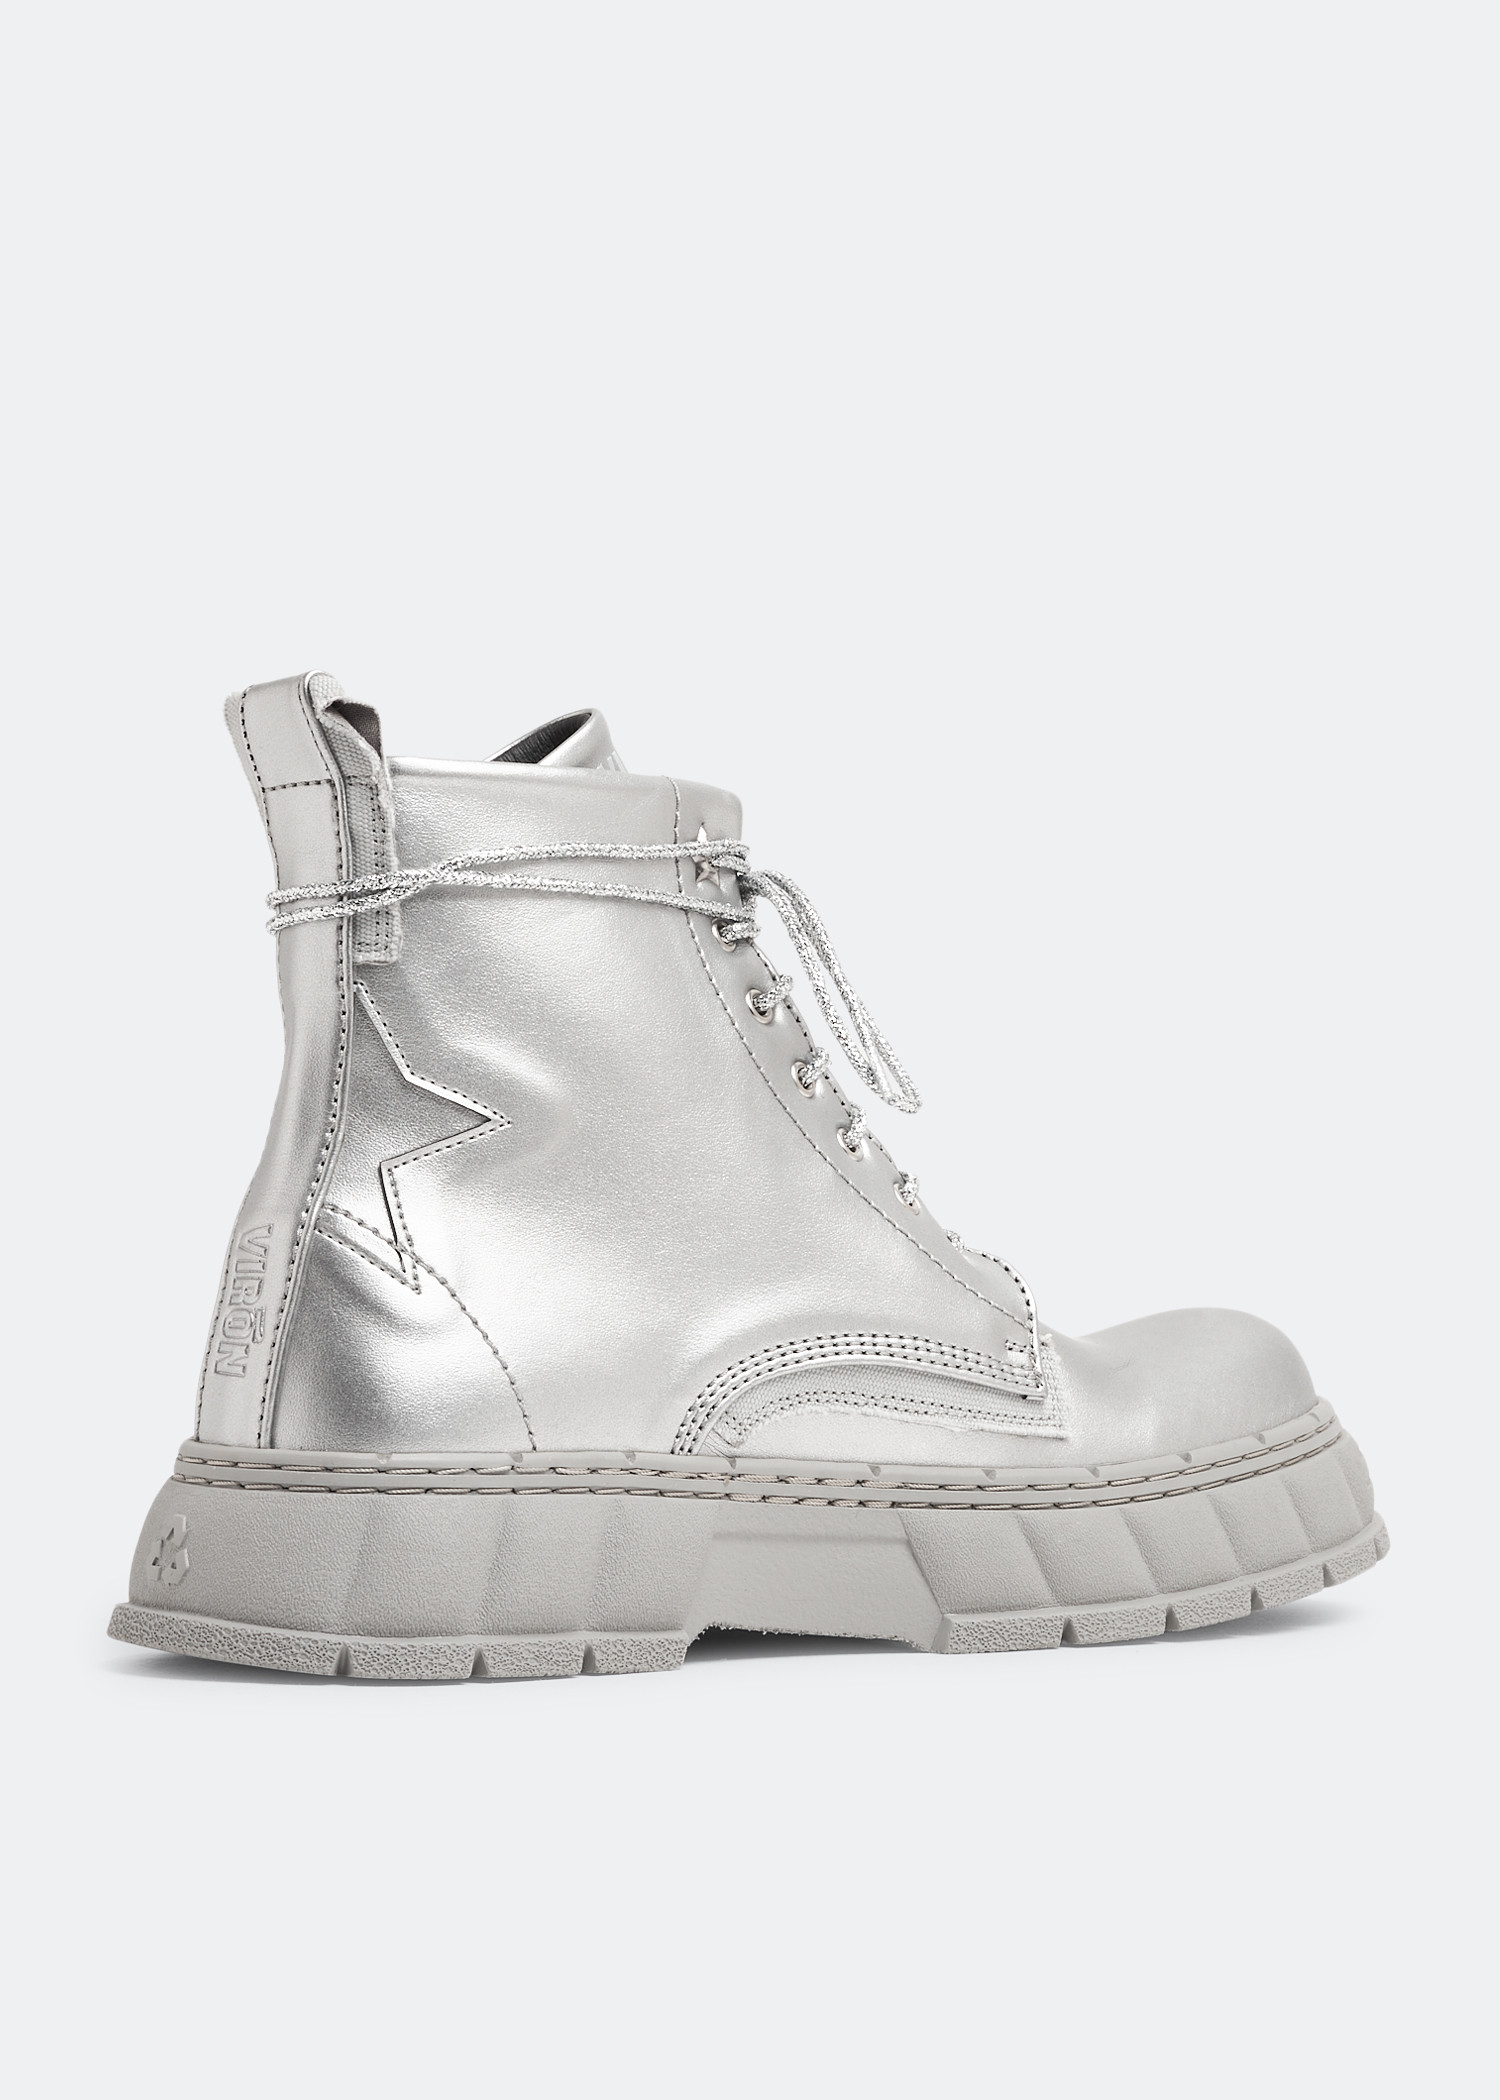 Viron x Collina Strada 1992 boots for Women - Silver in UAE